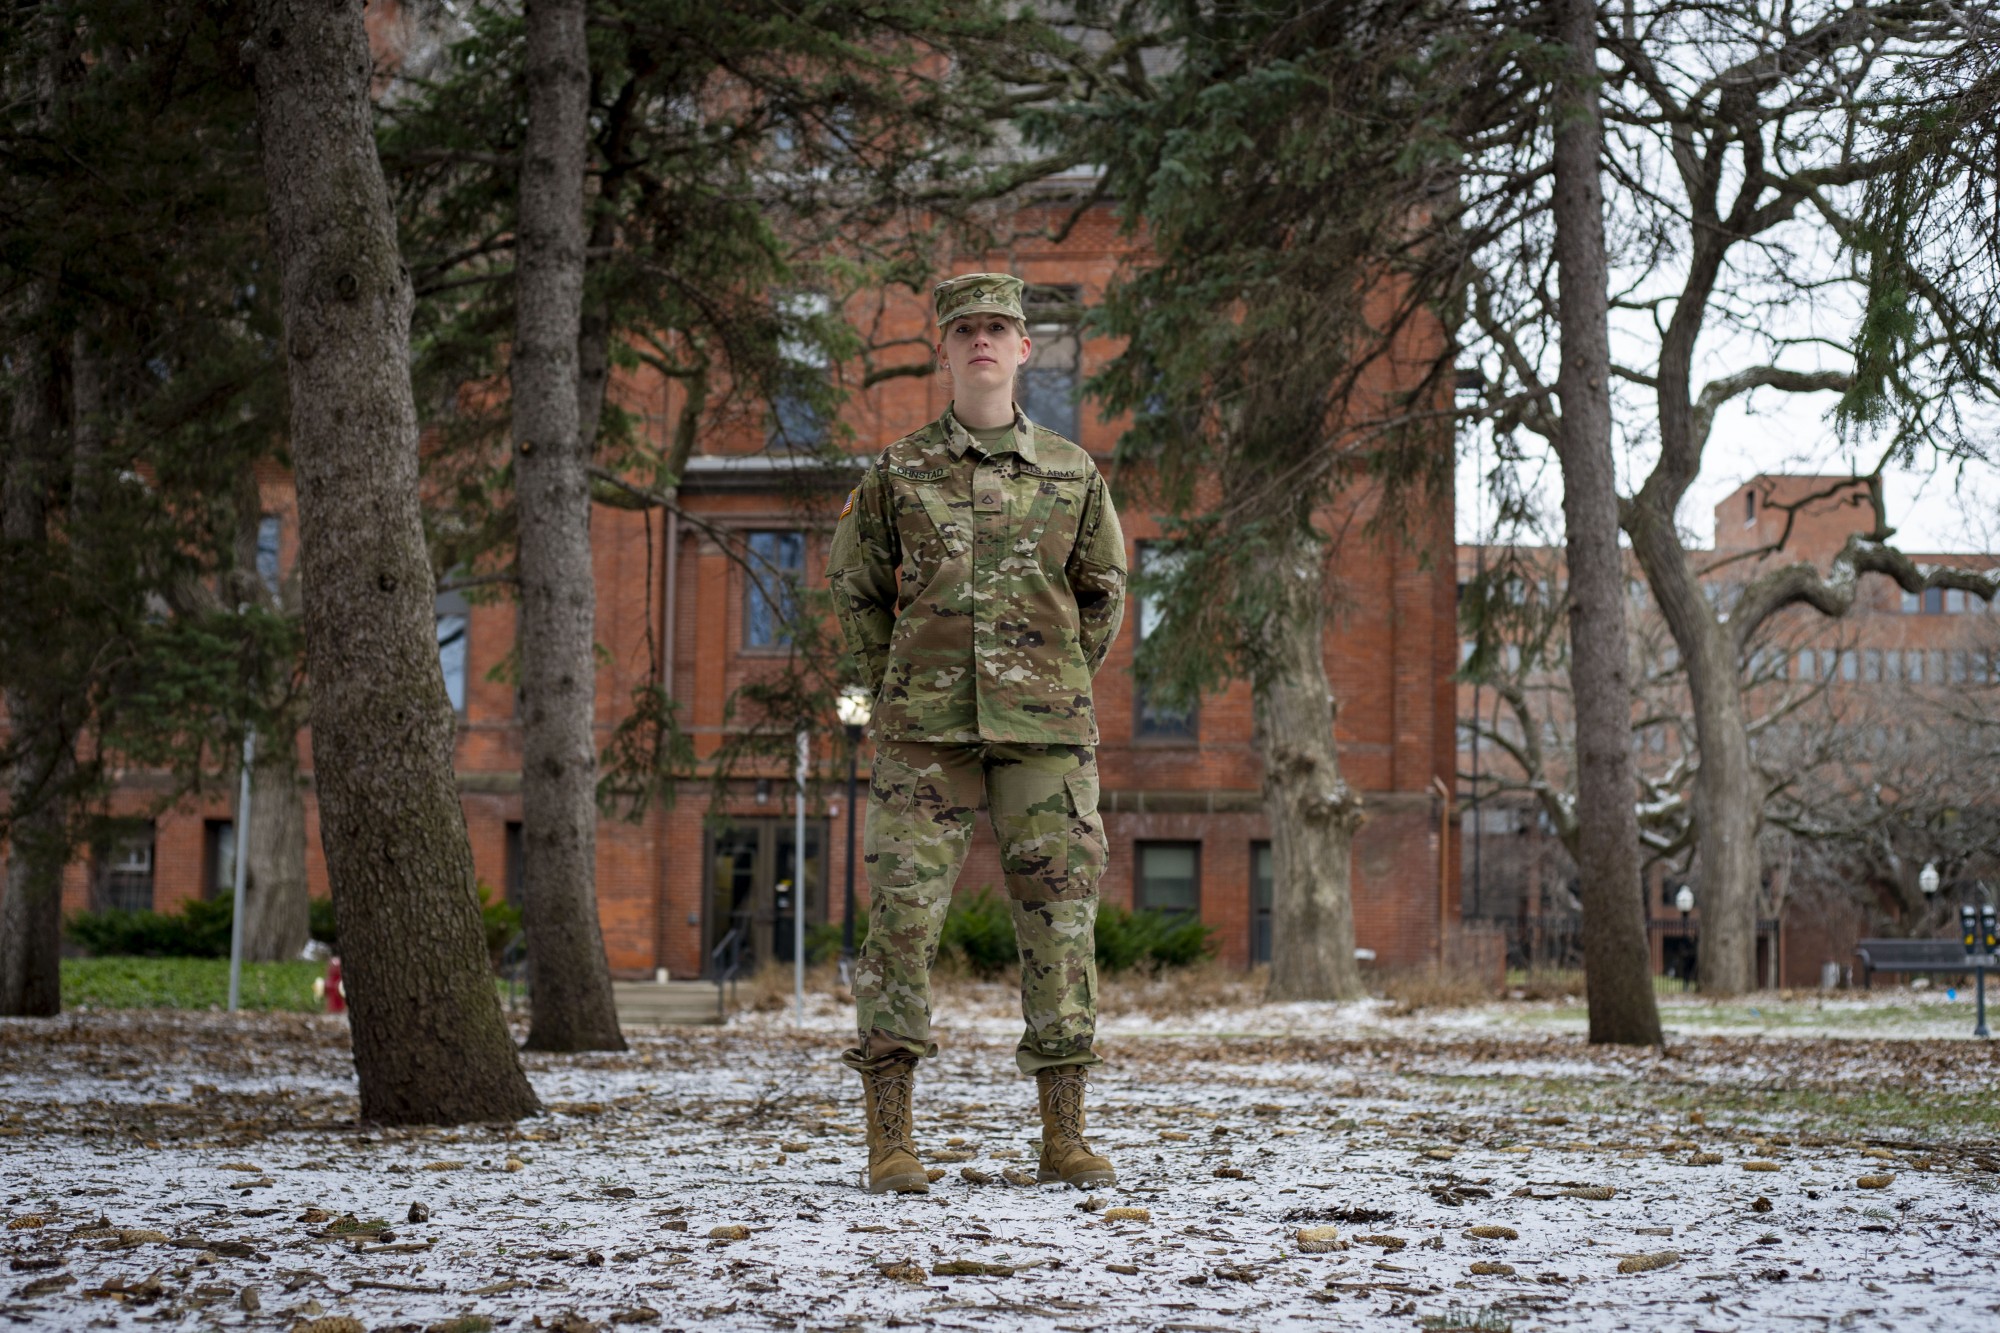 Senior Violet Ohnstad poses for a portrait on campus on Friday, April 3. Ohnstad, who enlisted in the National Guard in January, is uncertain what the next few months will look like as she prepares for basic training. 